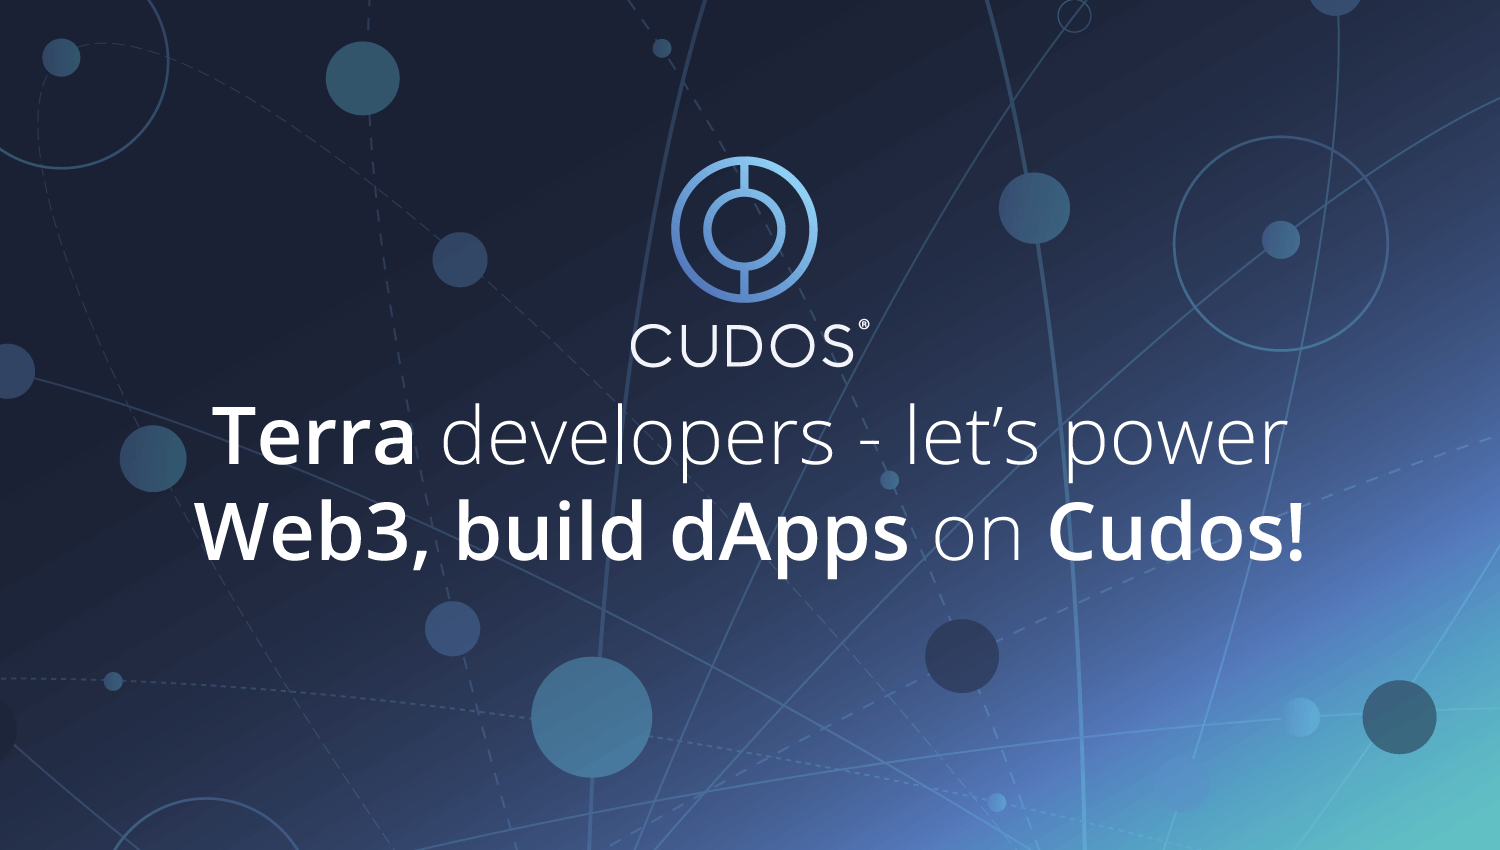 Terra developers – let’s power Web3! Build dApps on Cudos.